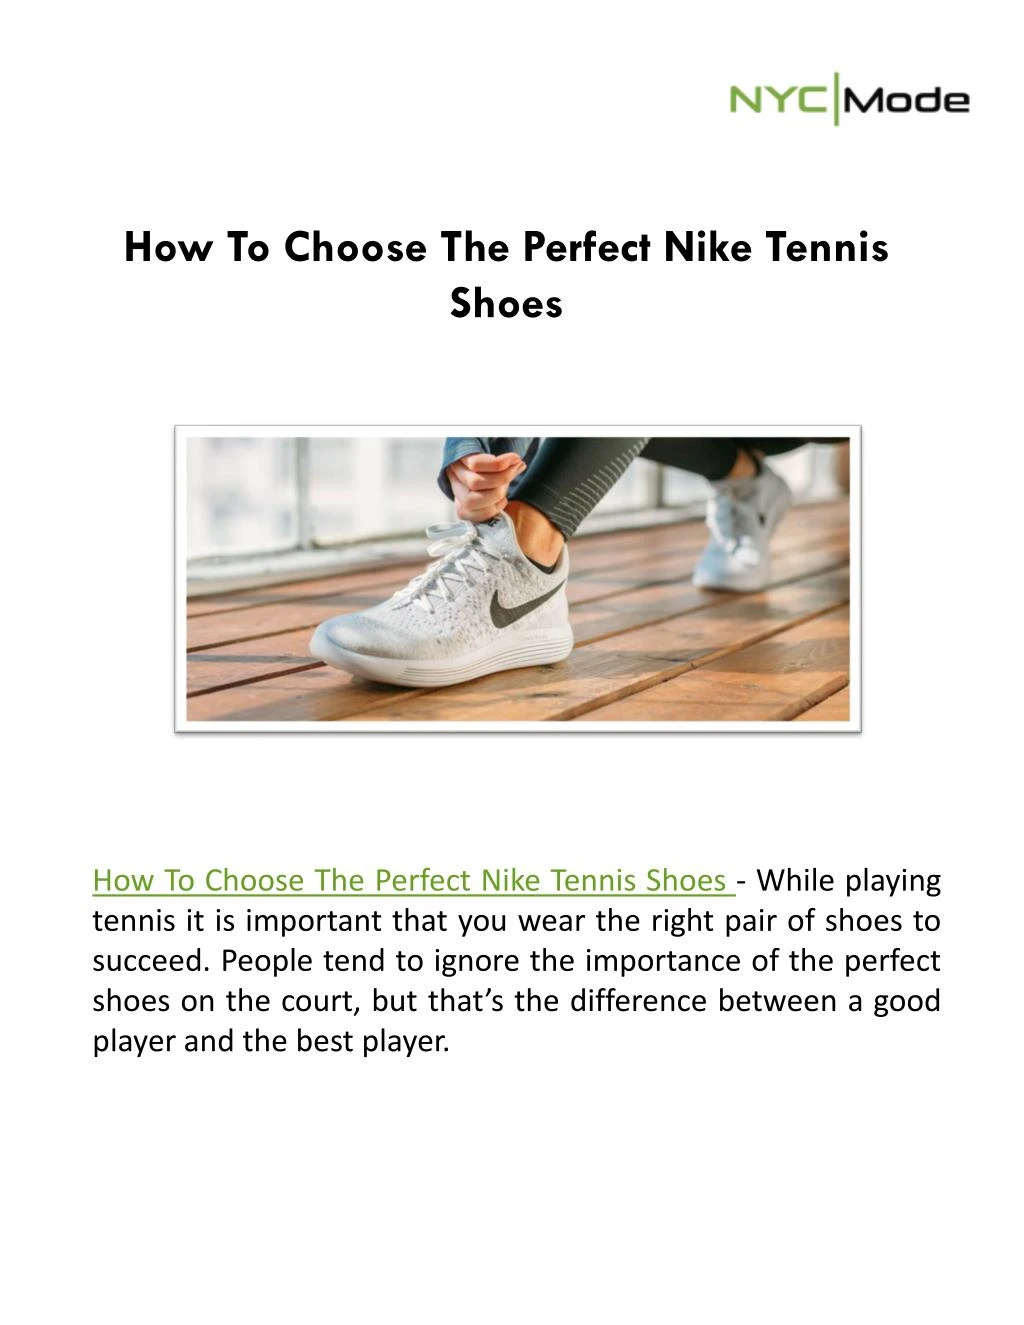 how to choose the perfect nike tennis shoes